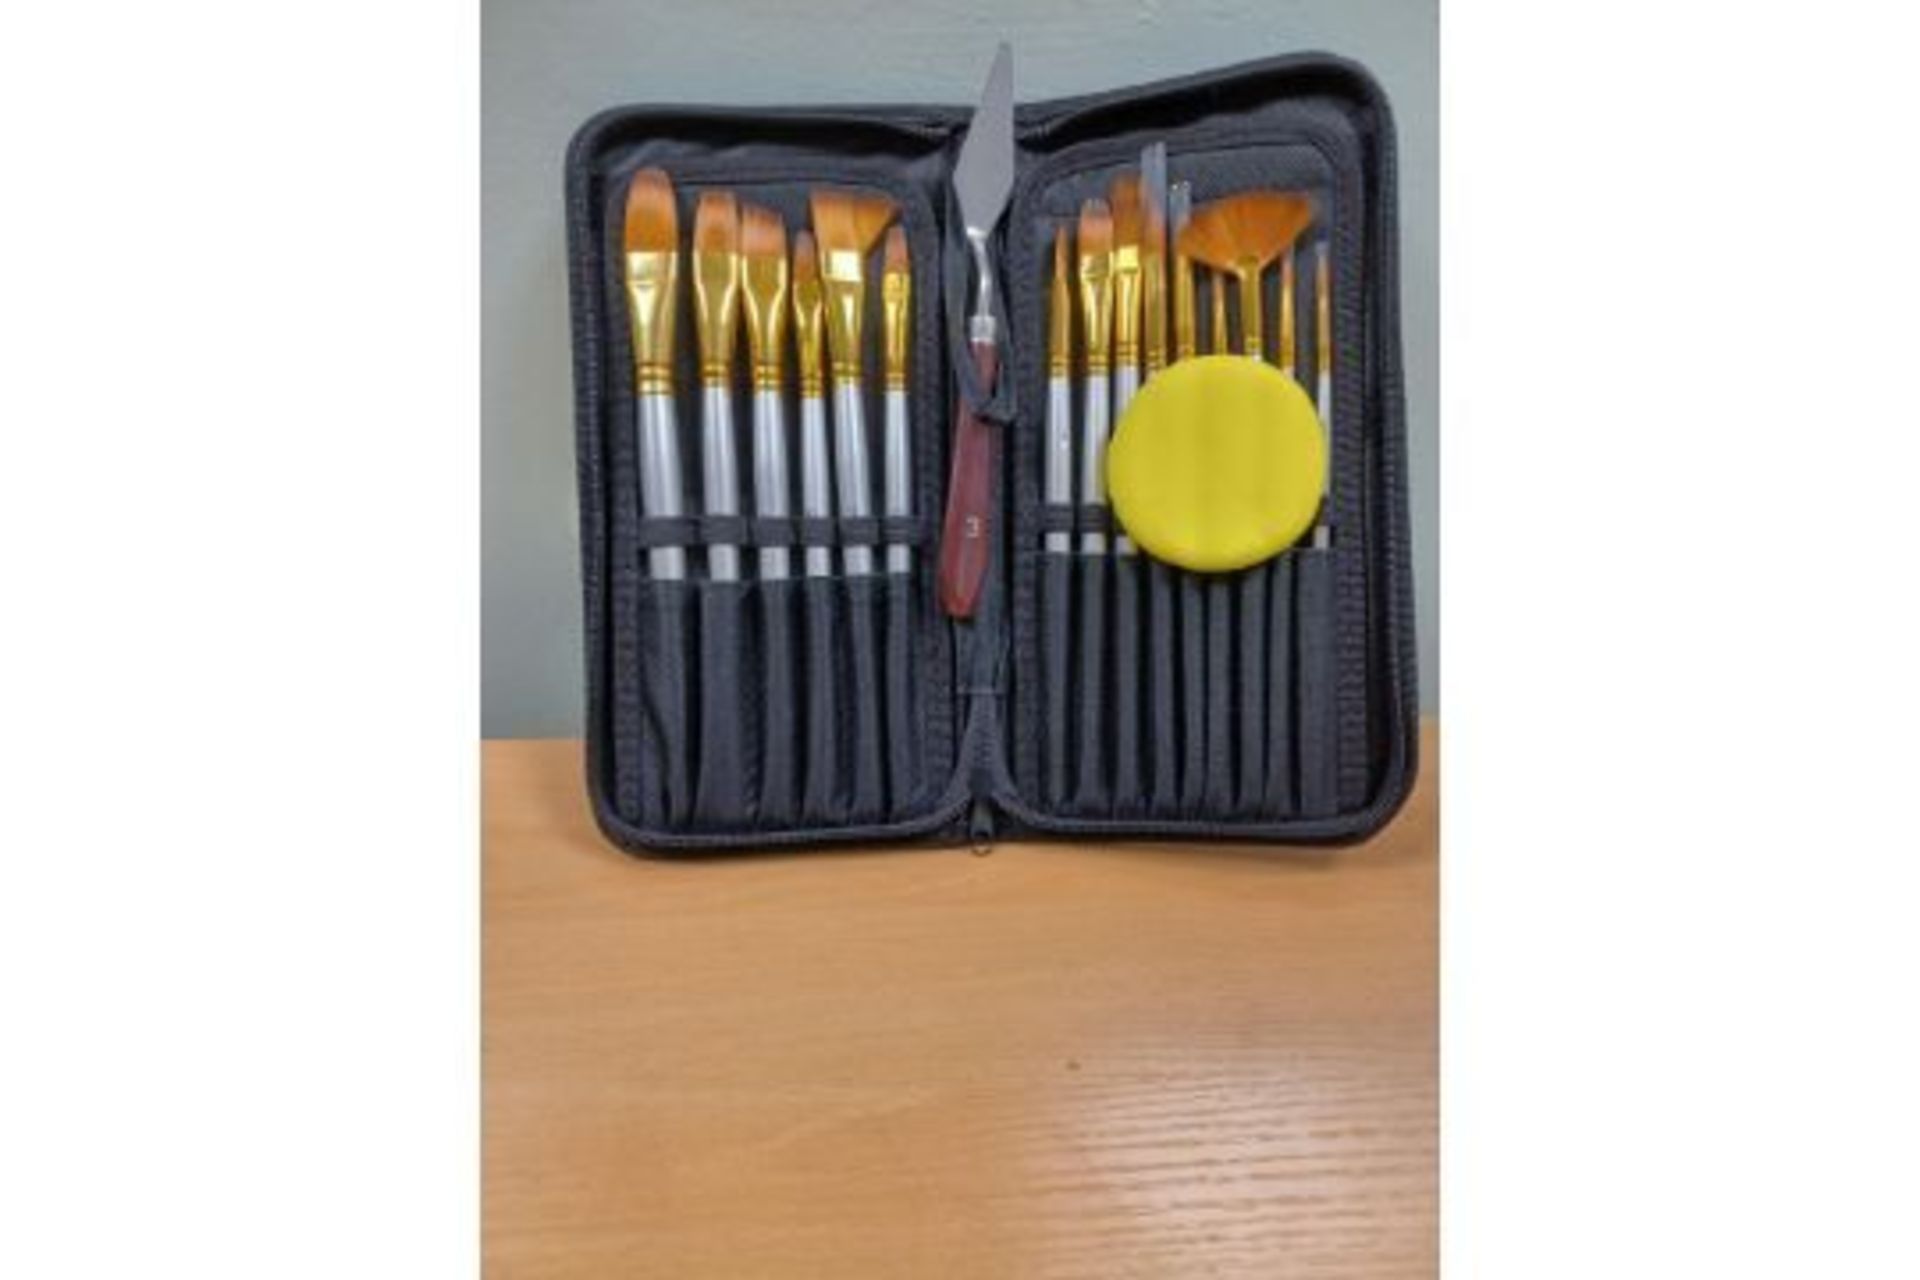 10 X SETS OF PUKKR 15 PIECE ARTISTS PAINT BRUSH SET WITH CASE (ROW 9)